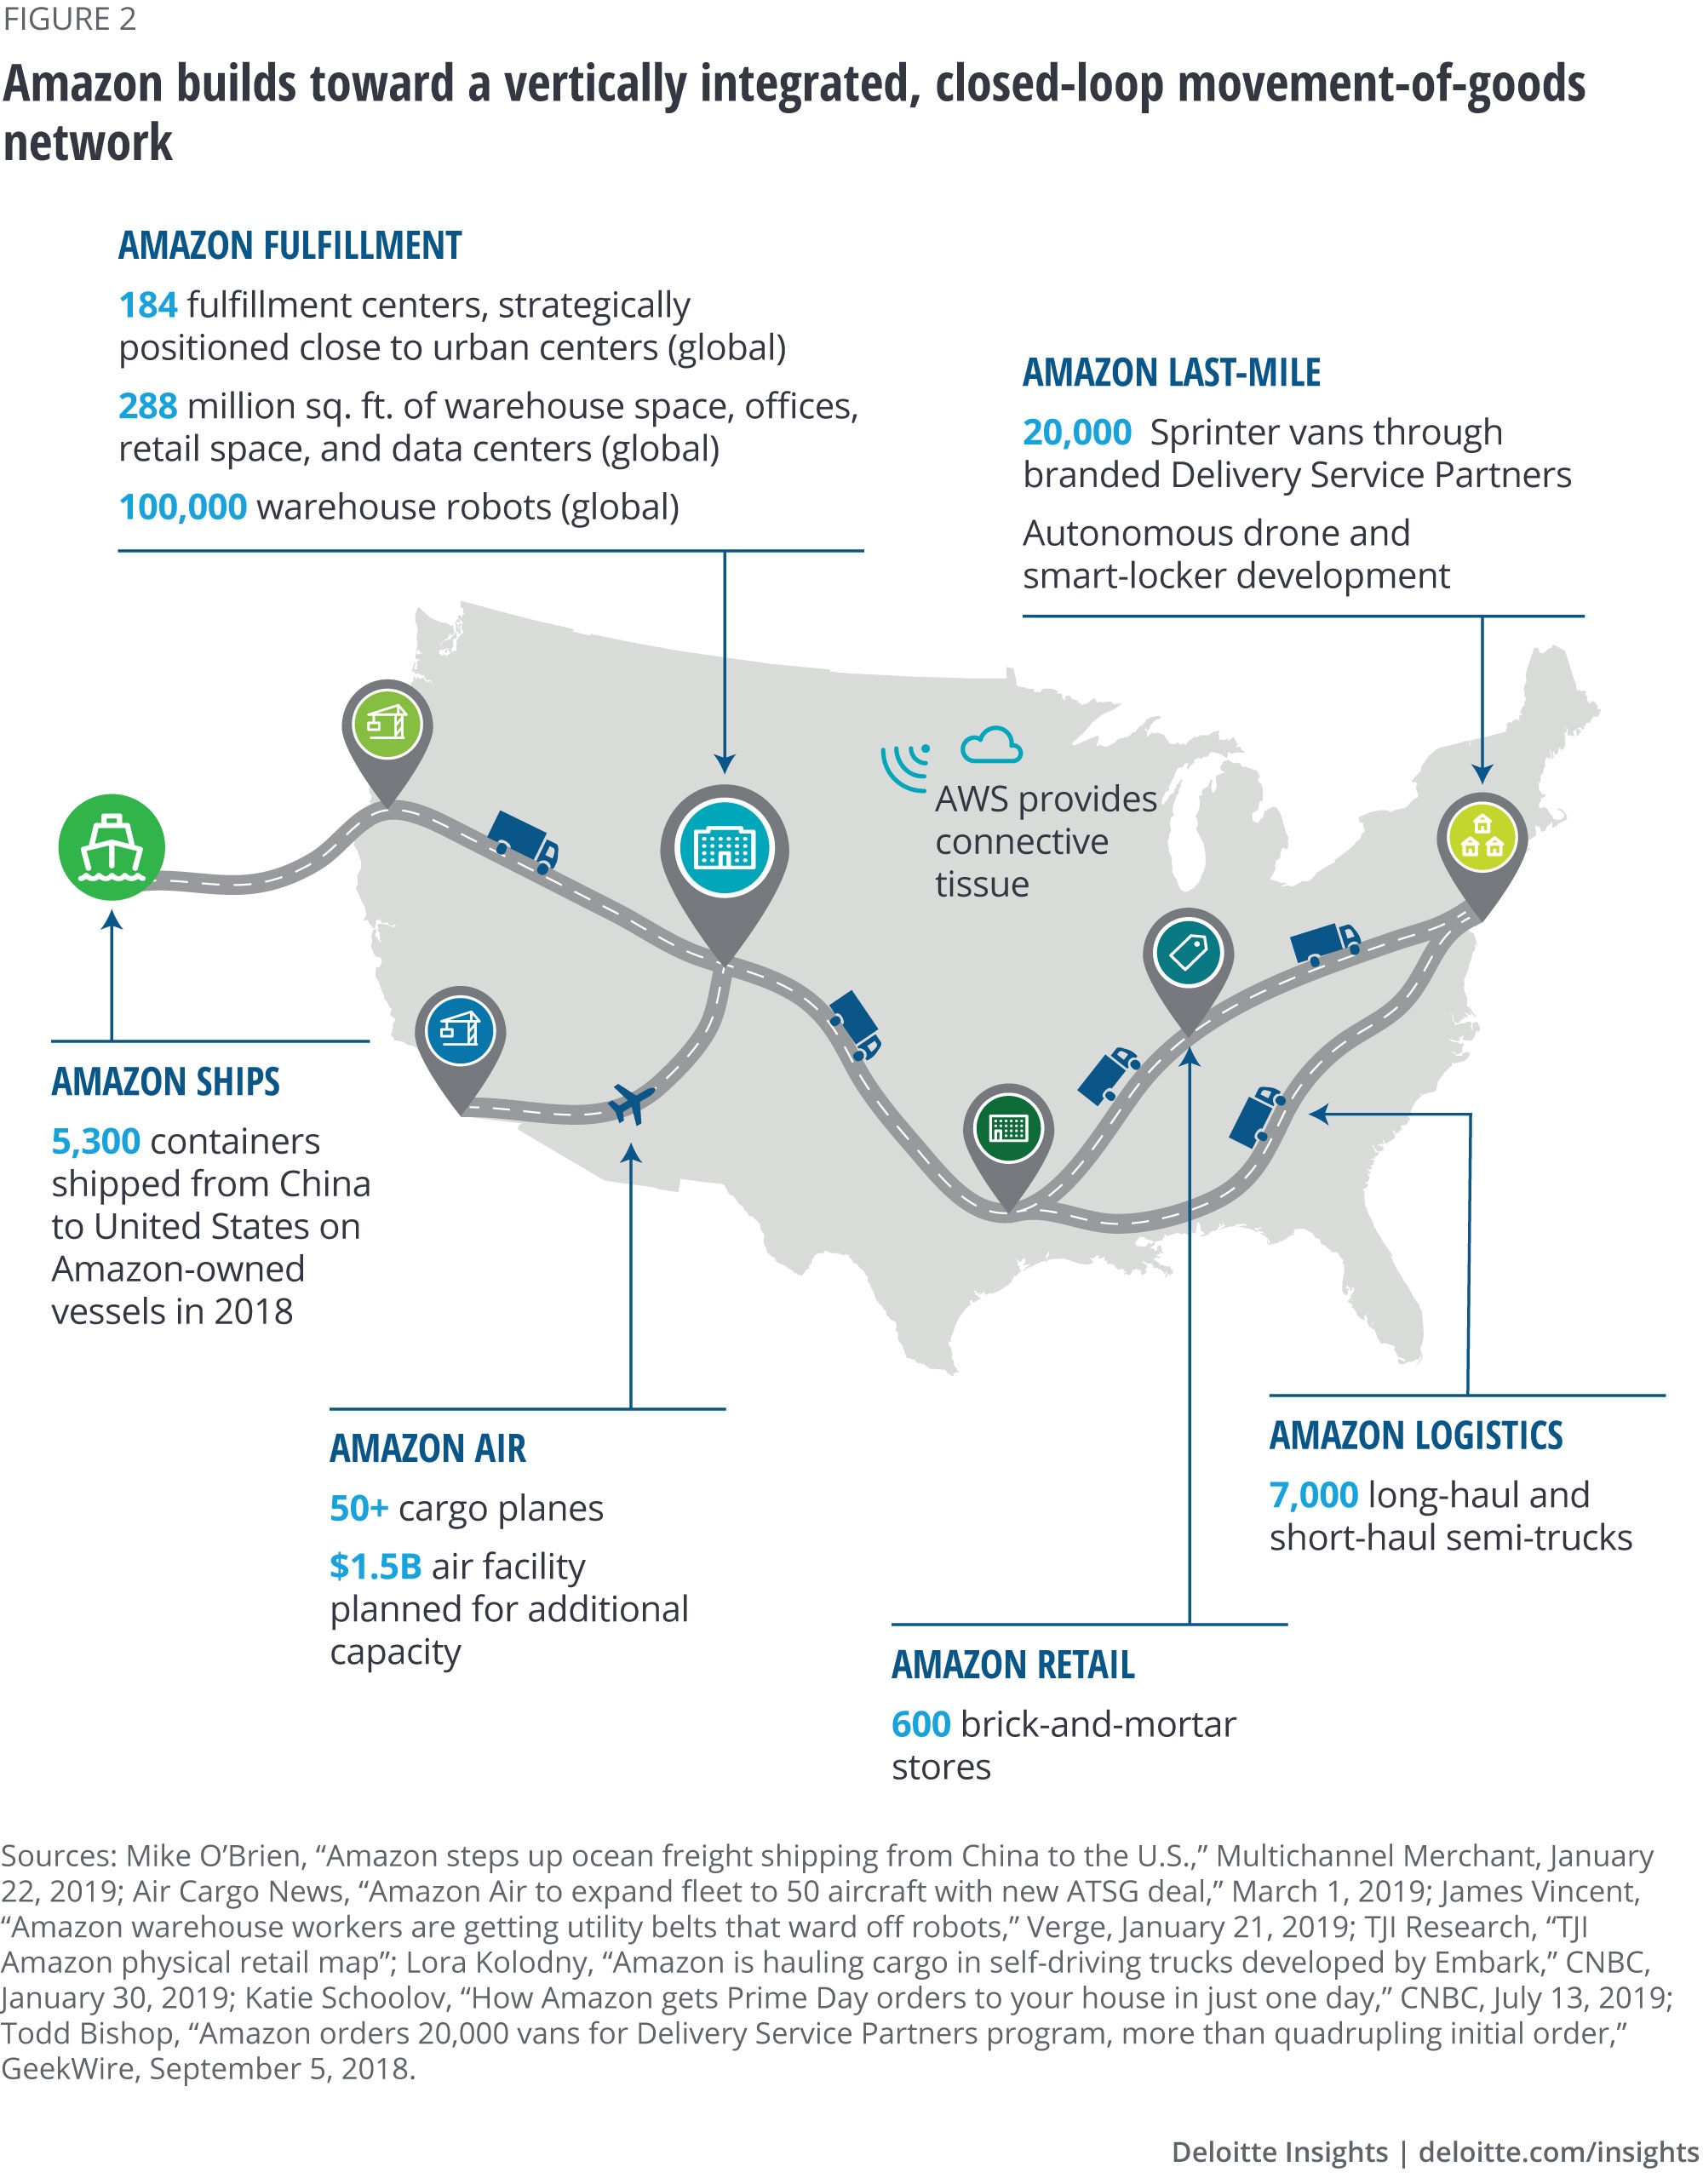 Amazon builds toward a vertically integrated, closed-loop movement-of-goods network